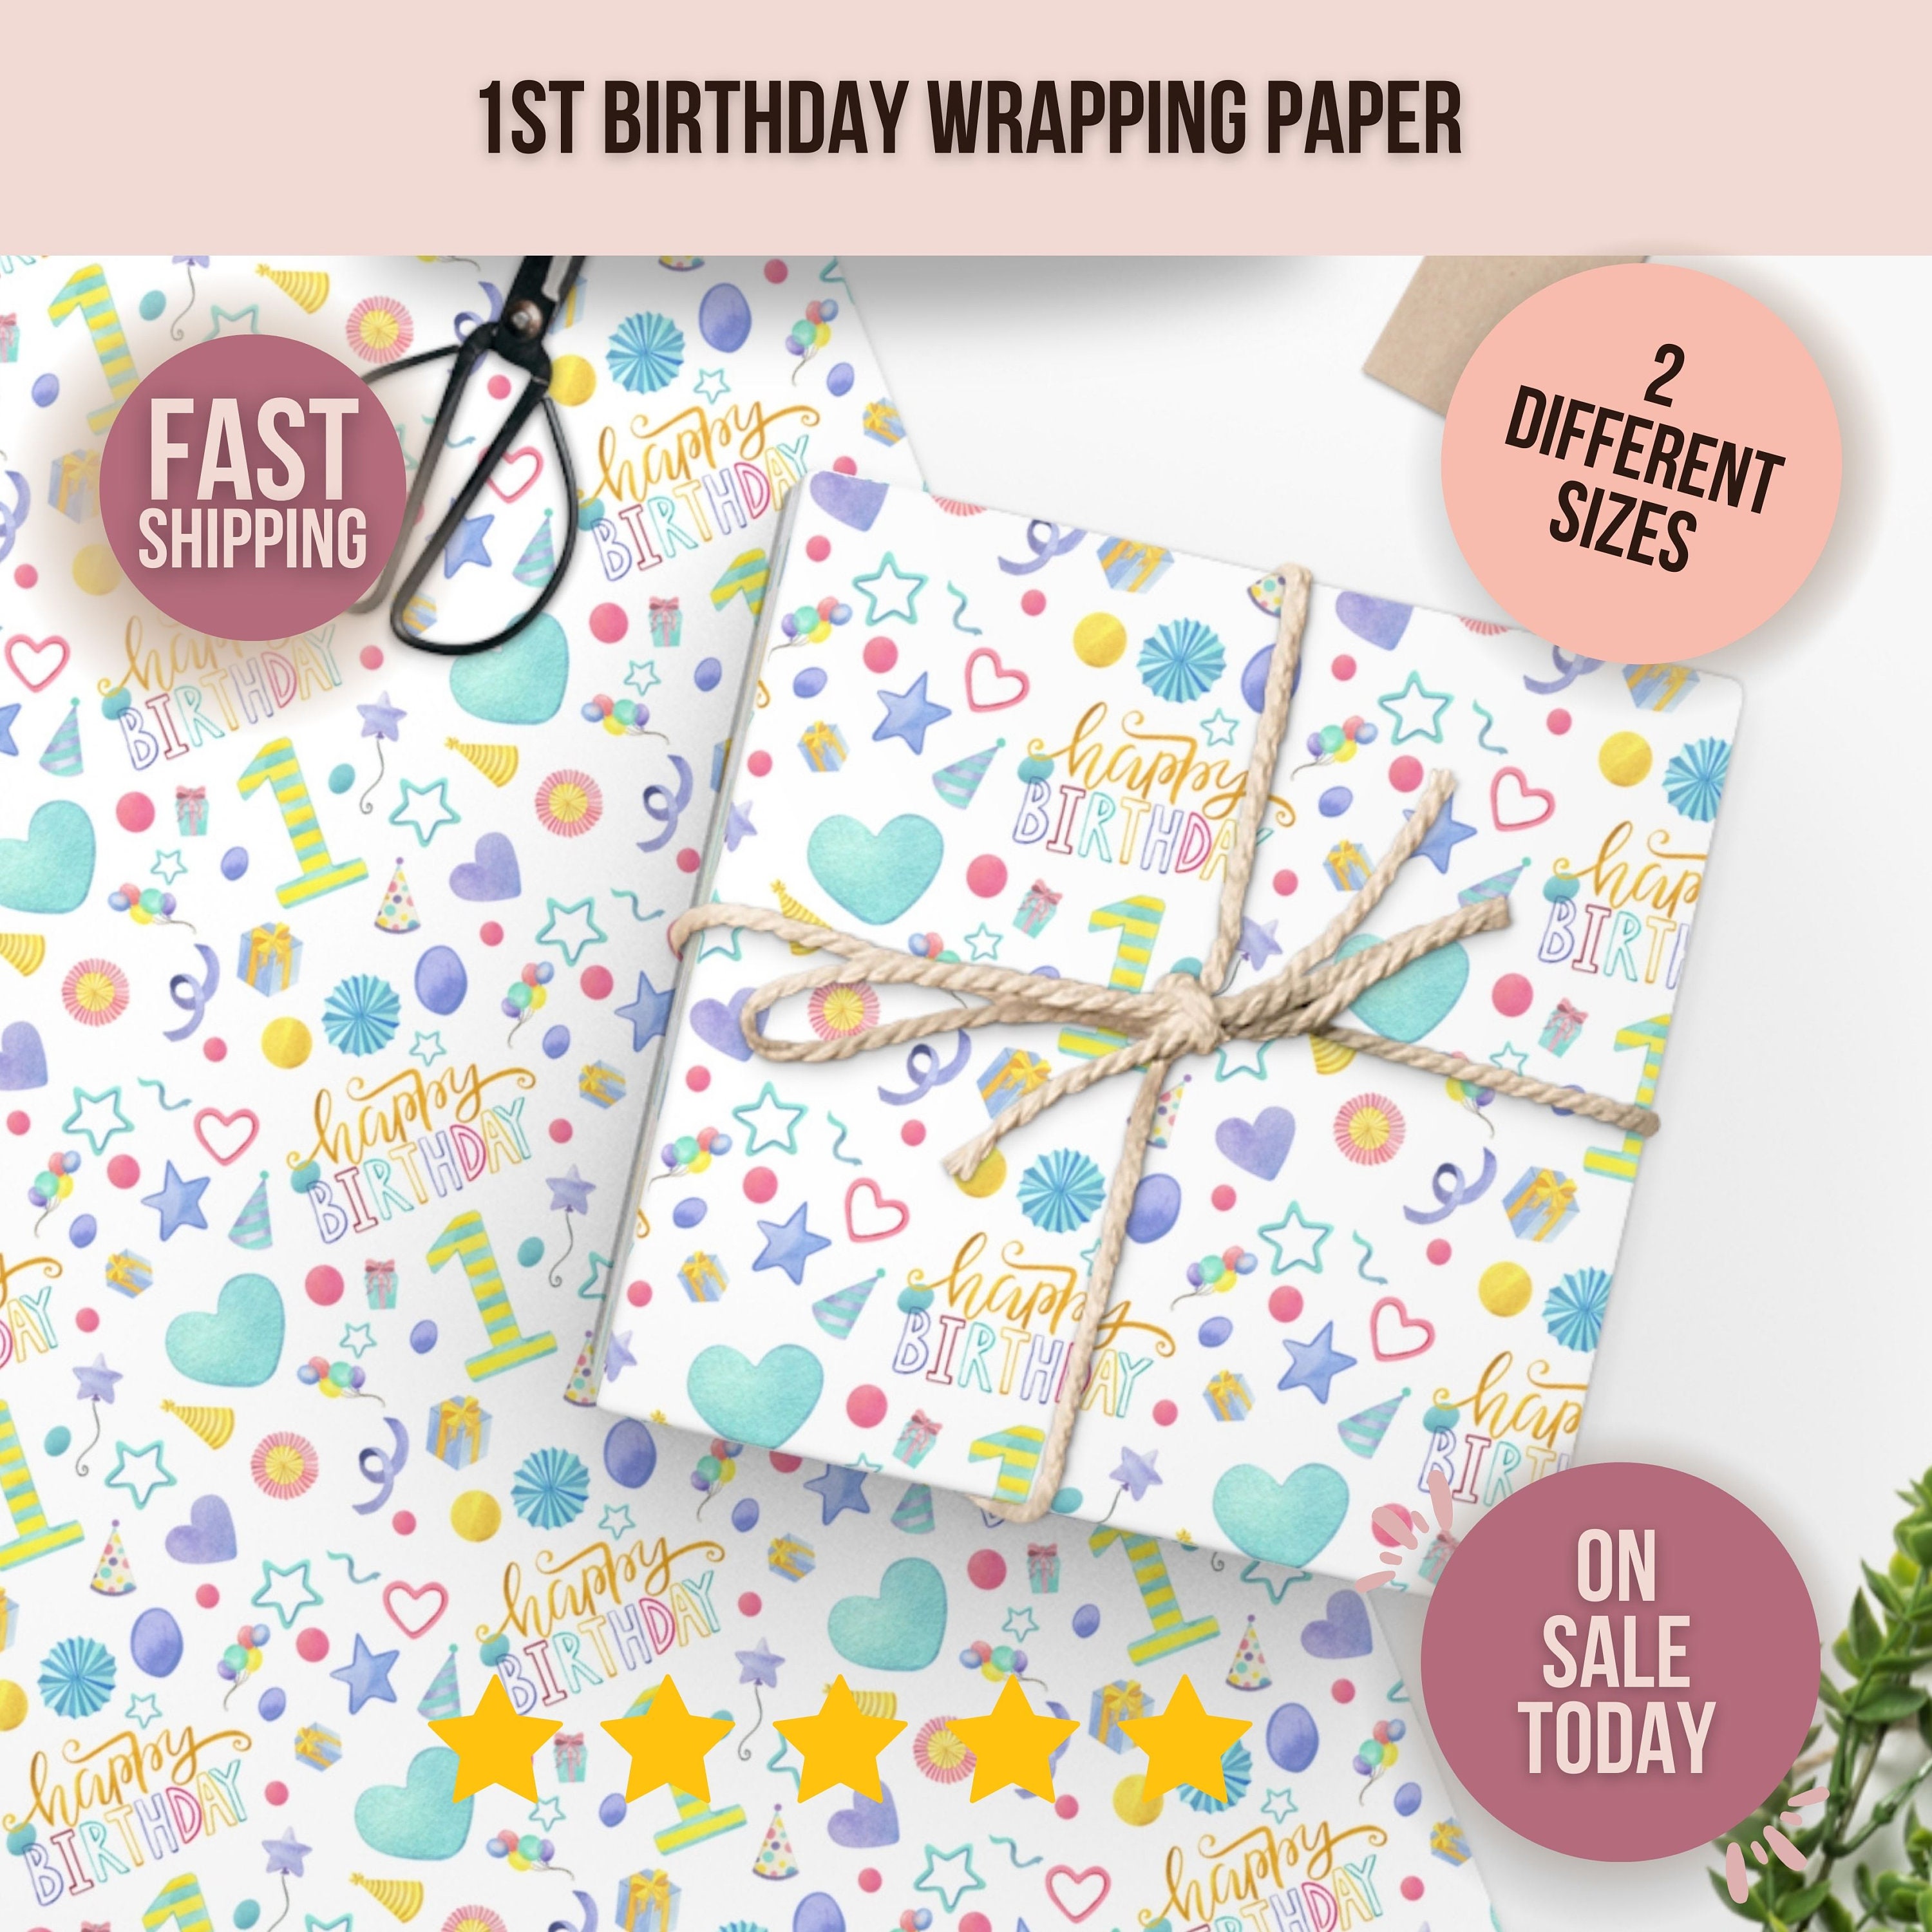 Charmkins Happy Birthday Wrapping Paper - 1 Sheet of Gift Wrap